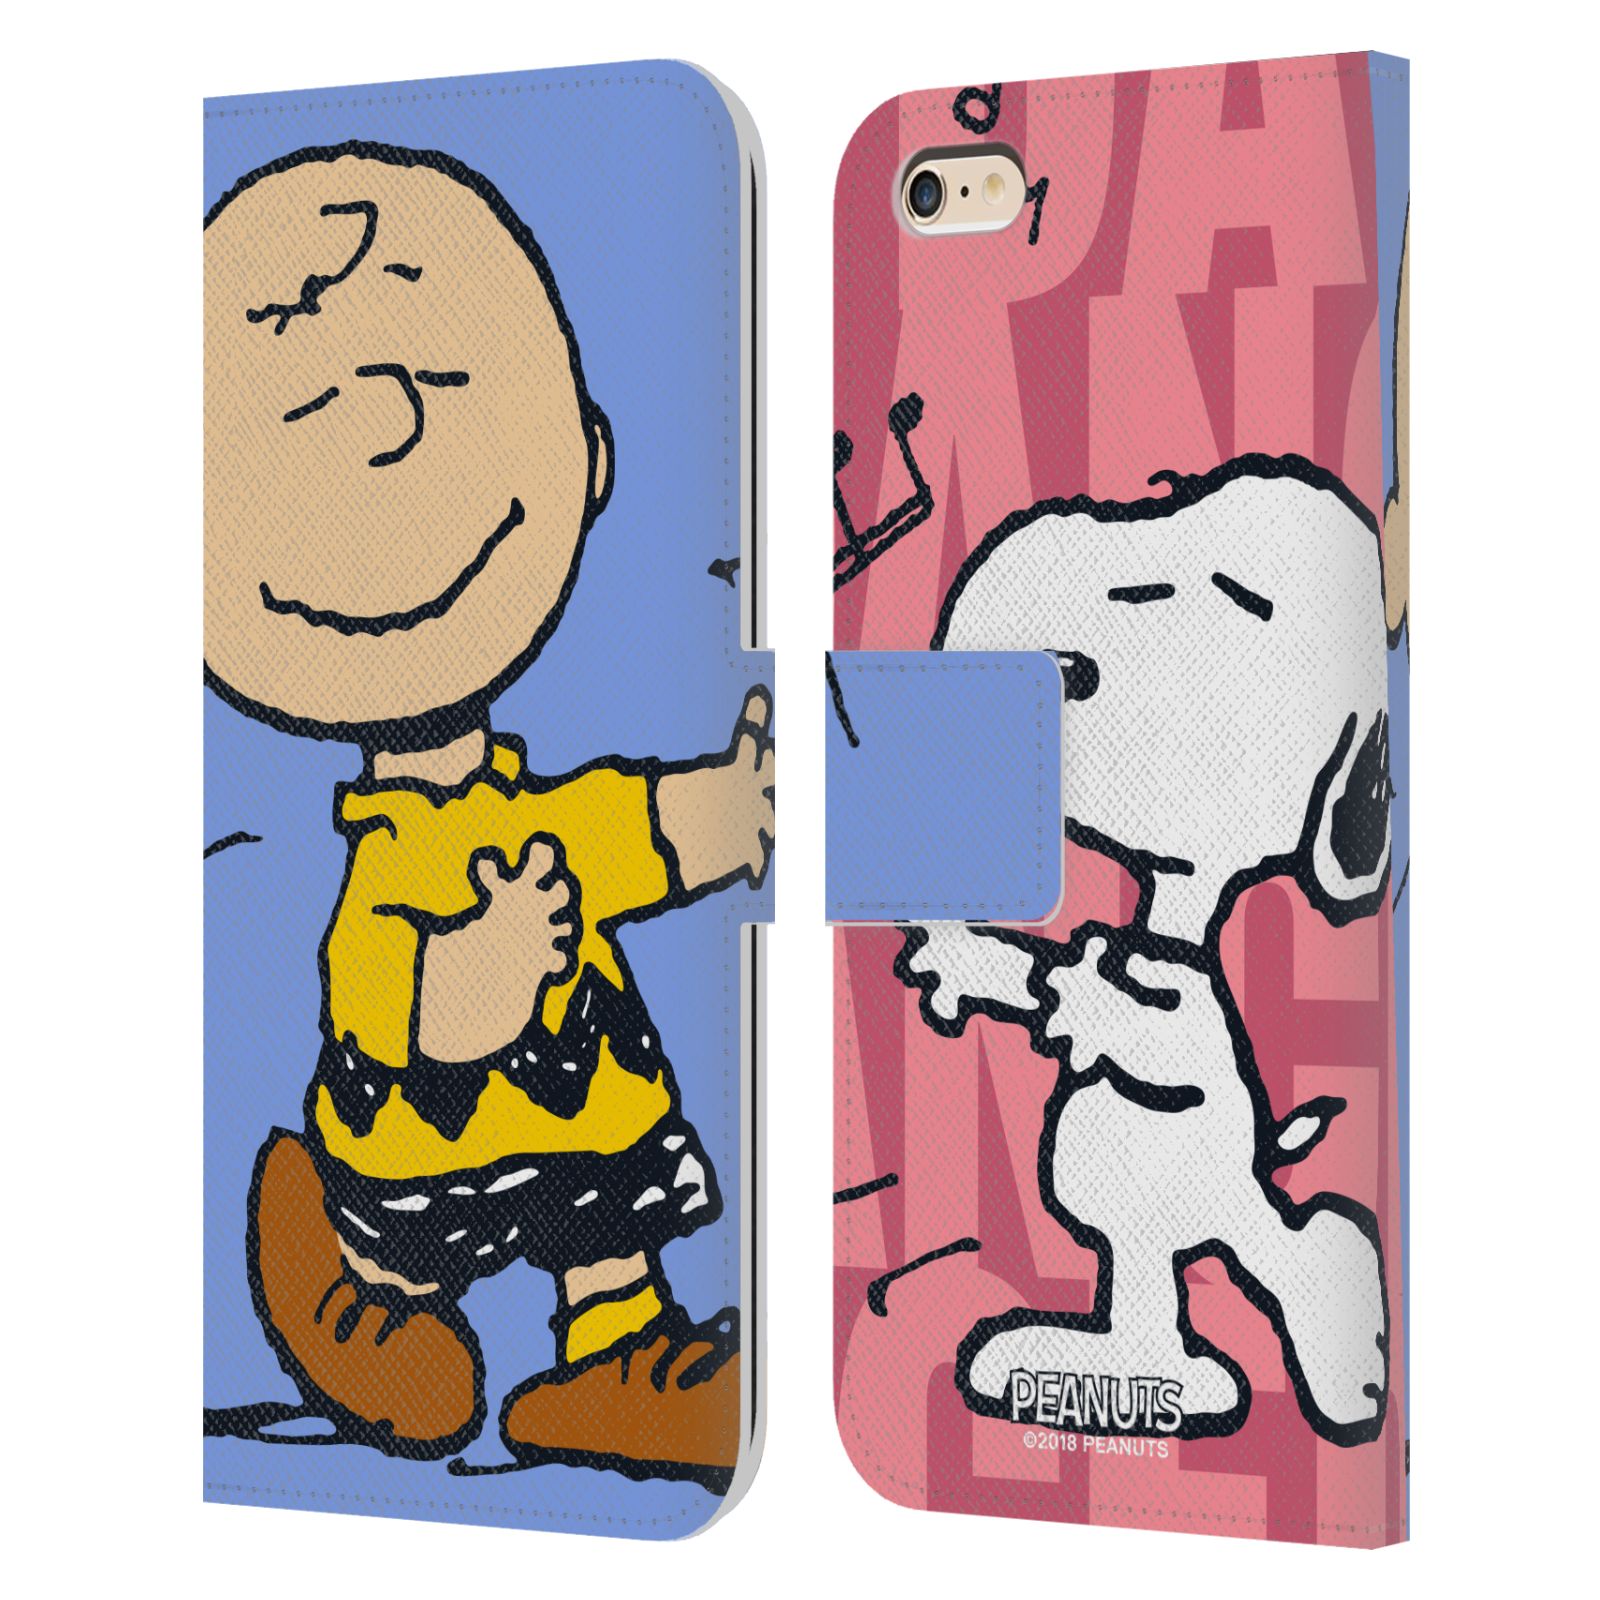 Pouzdro na mobil Apple Iphone 6 PLUS / 6S PLUS - Head Case - Peanuts - Snoopy a Charlie